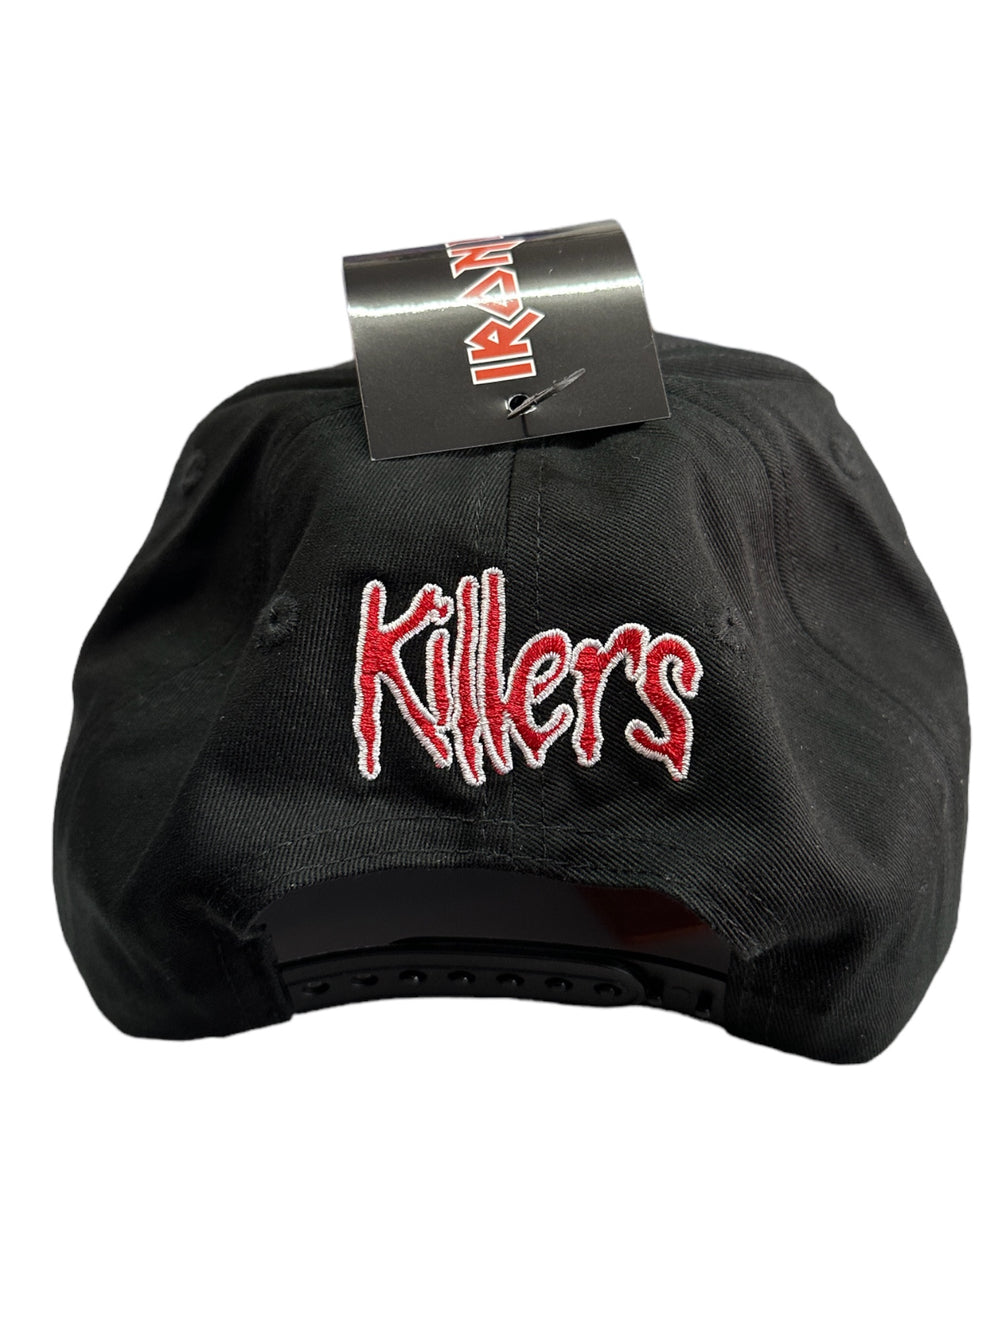 Iron Maiden Official Killers Embroid Peak Cap  Brand New